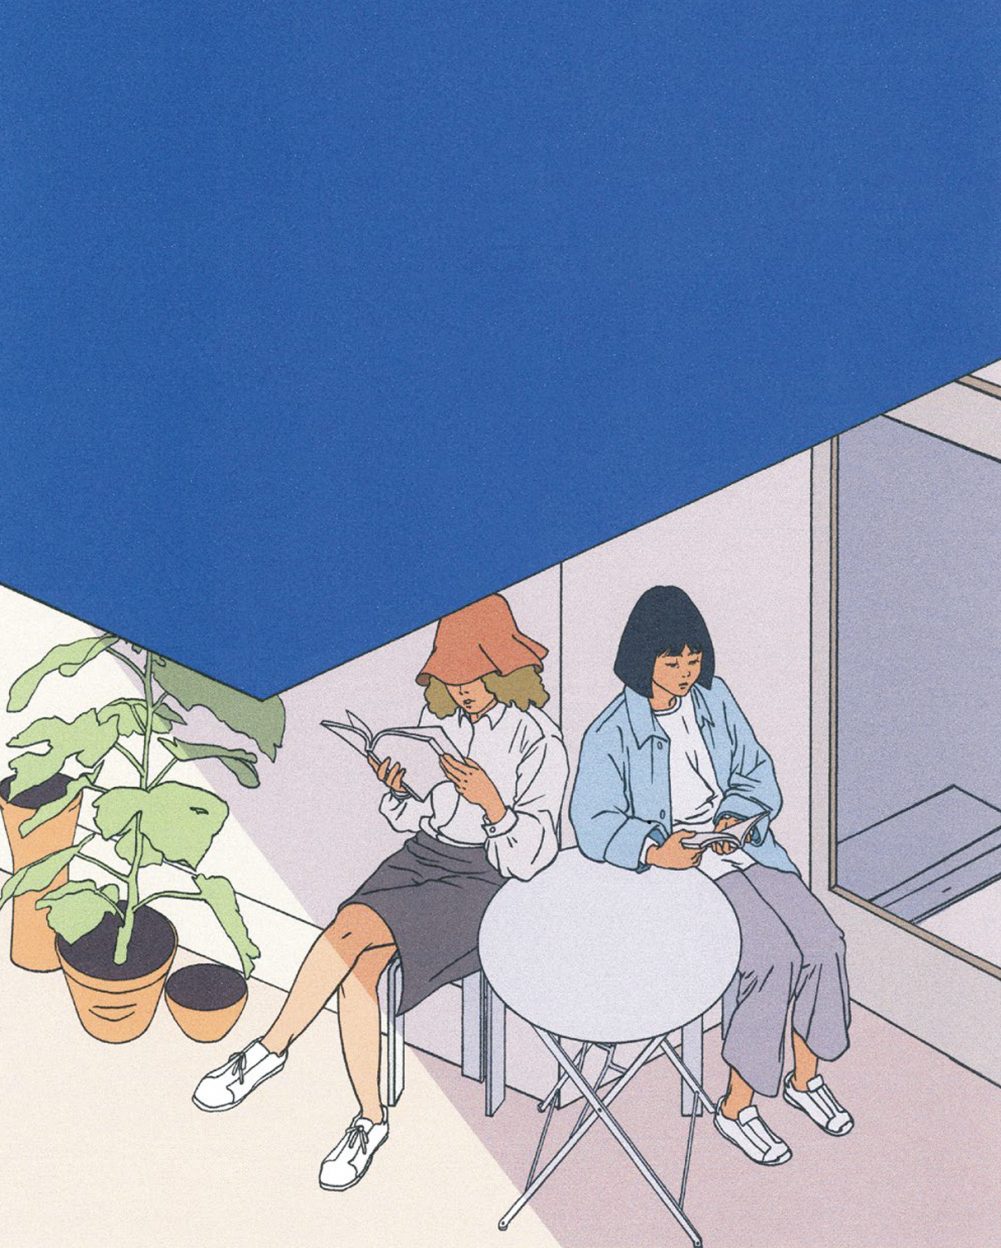 Illustration of 2 women sitting at small cafe table reading. An awning blocks the sun and a few plants sit beside them.